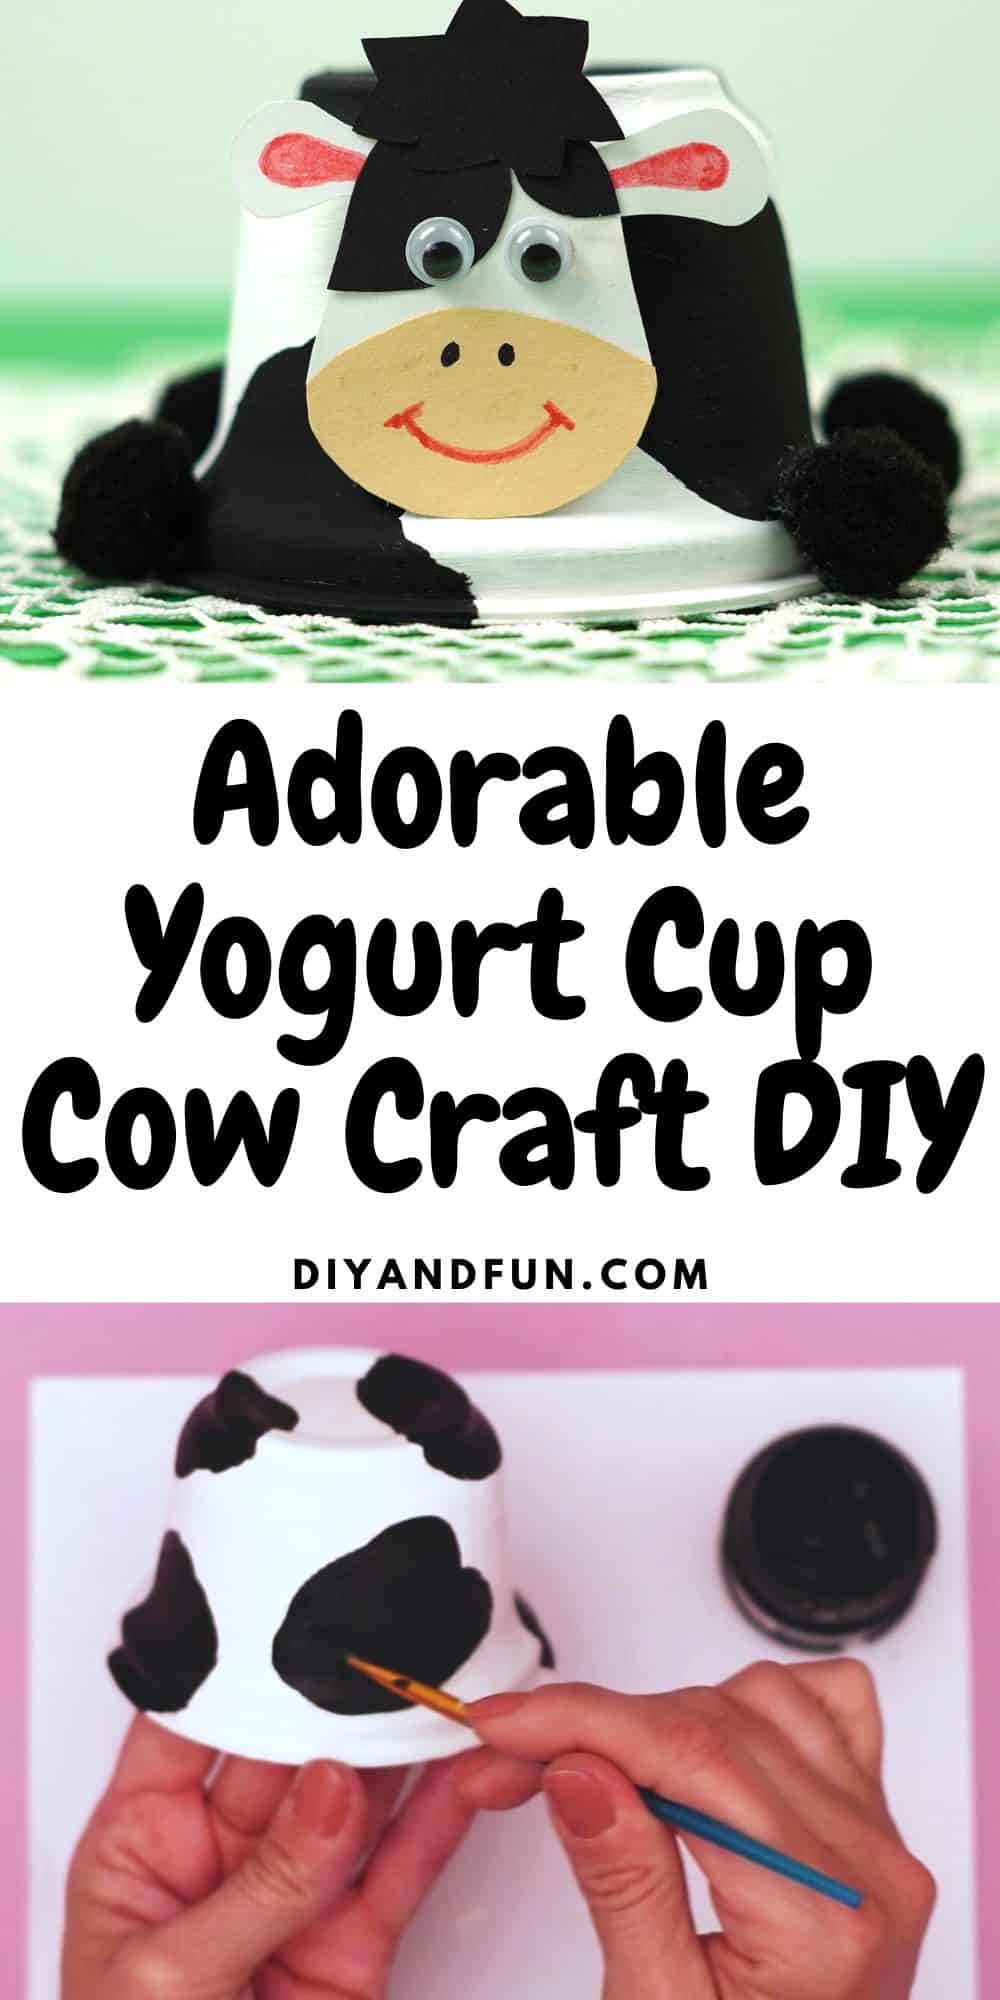 Adorable Yogurt Cup Cow Craft DIY, a simple project idea for turning a yogurt or similar cup into a cute cow.